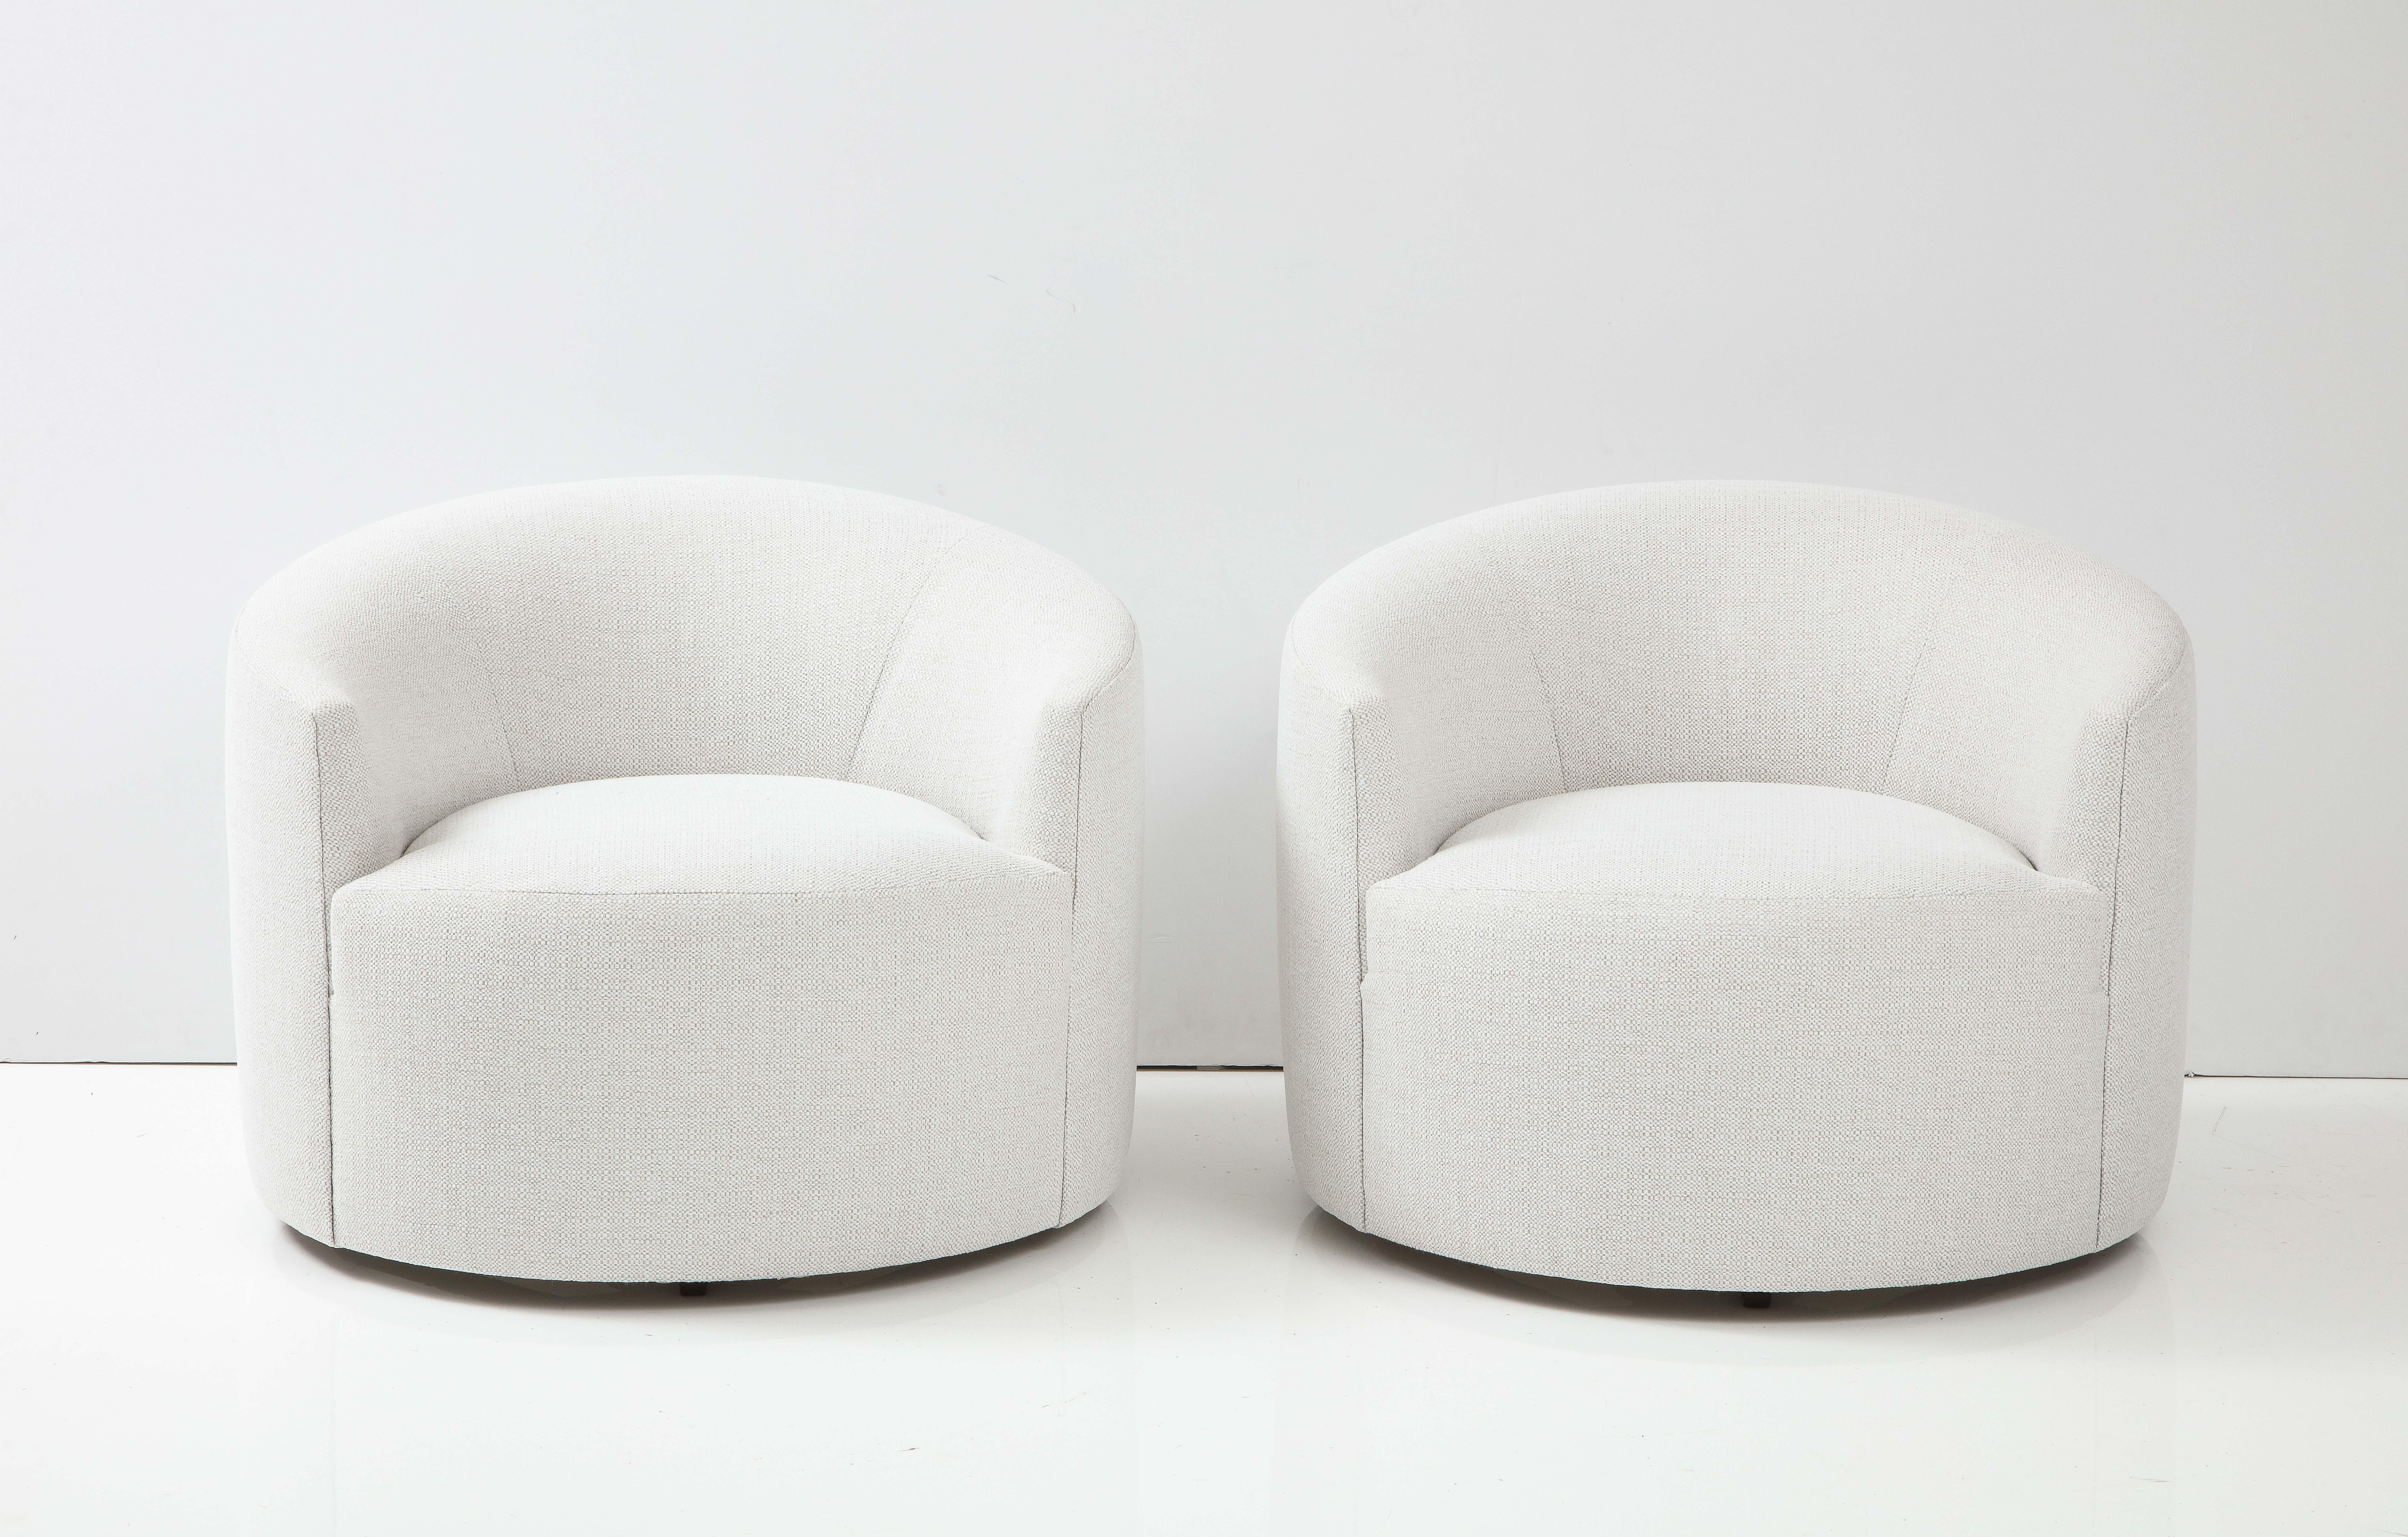 Modernist pair of swivel bucket chairs having clean tailored lines and new linen/cotton white basketweave upholstery fabric. In the style of Milo Baughman design for Thayer Coggin Co.